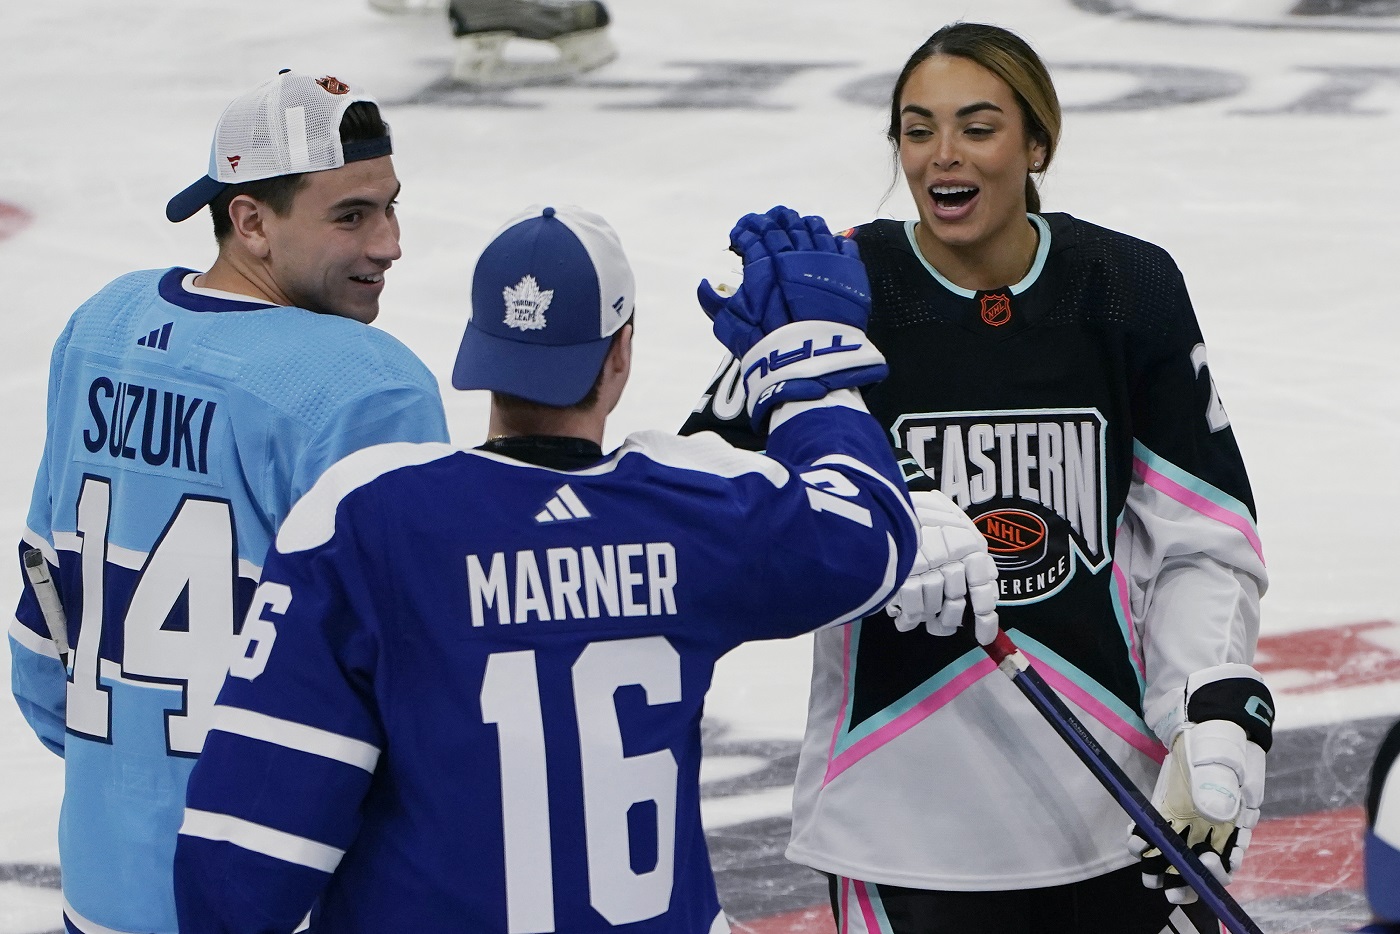 As the NHL lends an assist, top men’s players hope the new women’s hockey league thrives